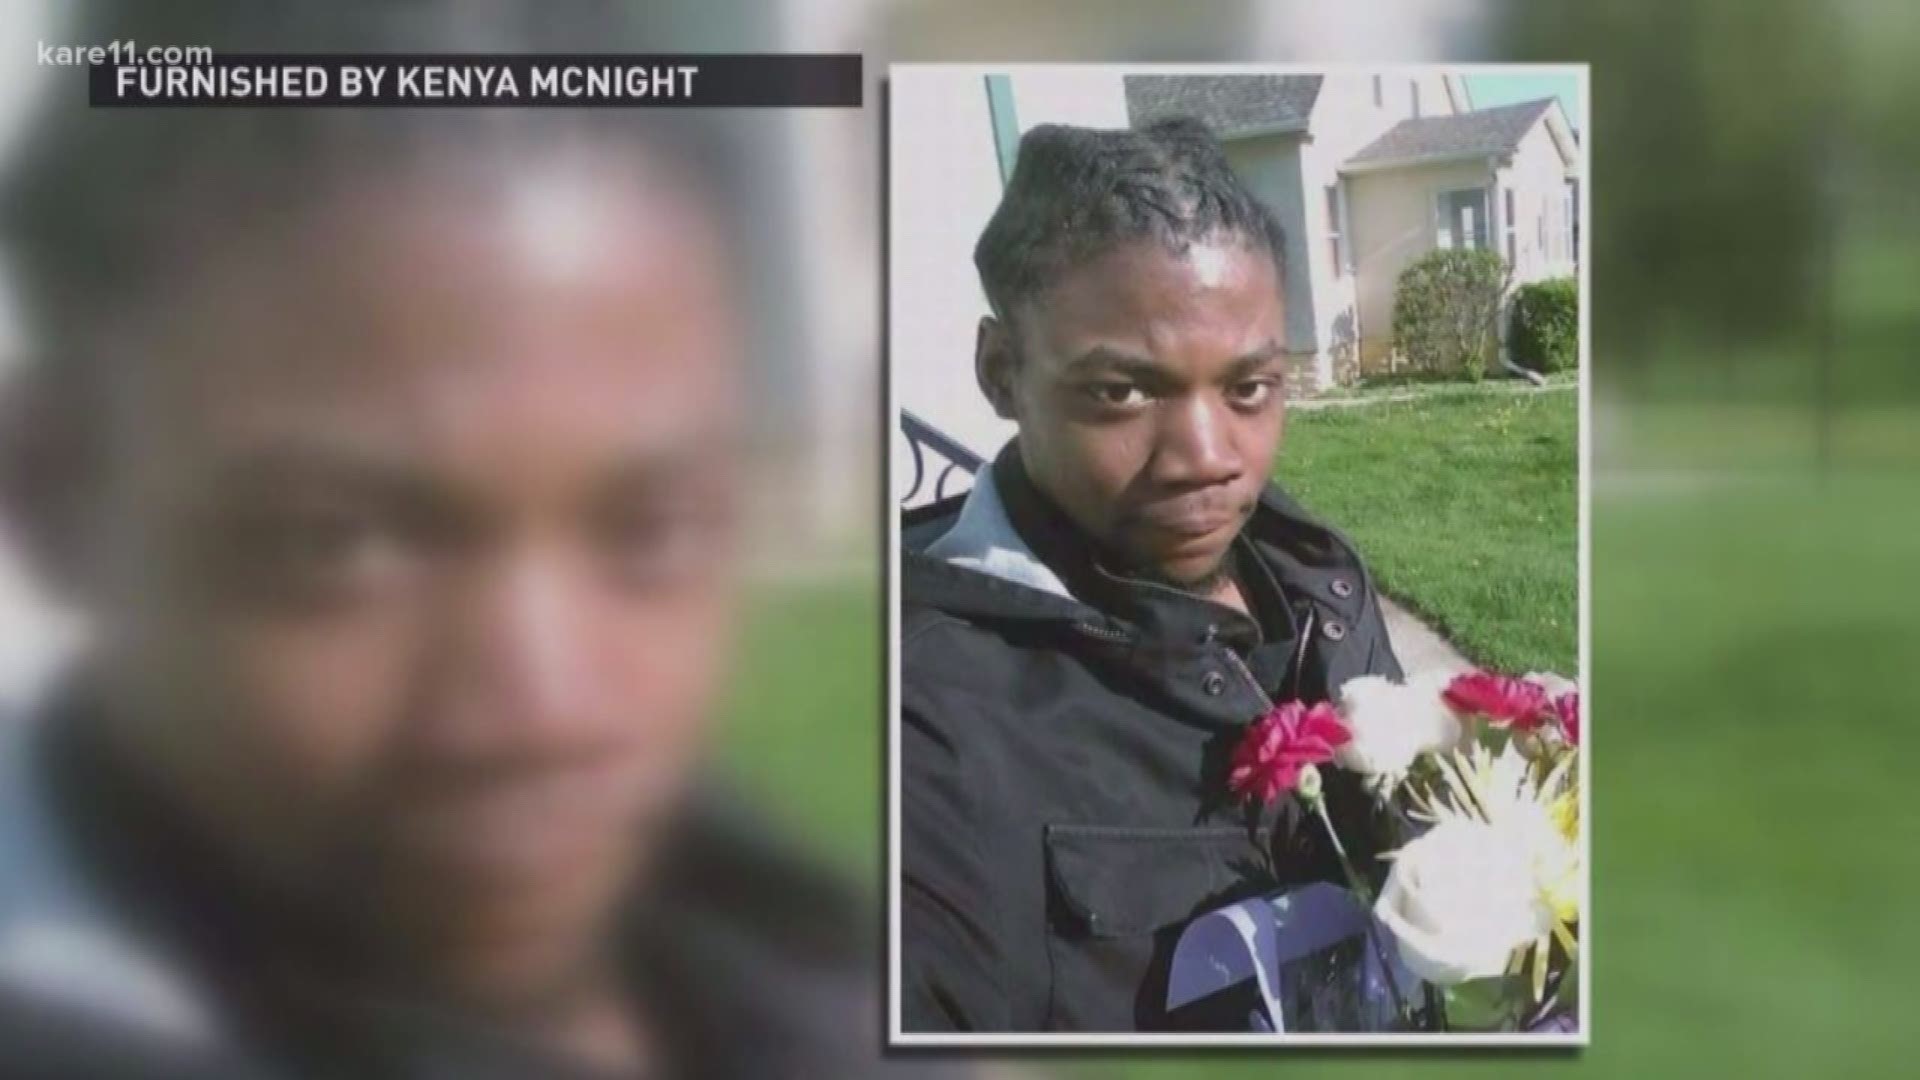 The Minneapolis City Council Friday approved a $200,000 lawsuit with the family of Jamar Clark, who was shot to death in 2015 by a police officer as another officer scuffled with him on the ground. After deducting attorneys fees, the money will be divided evenly among eight of Clark's relatives. The Hennepin County prosecutor declined to charge the officers with any crimes in connection with Clark's death.